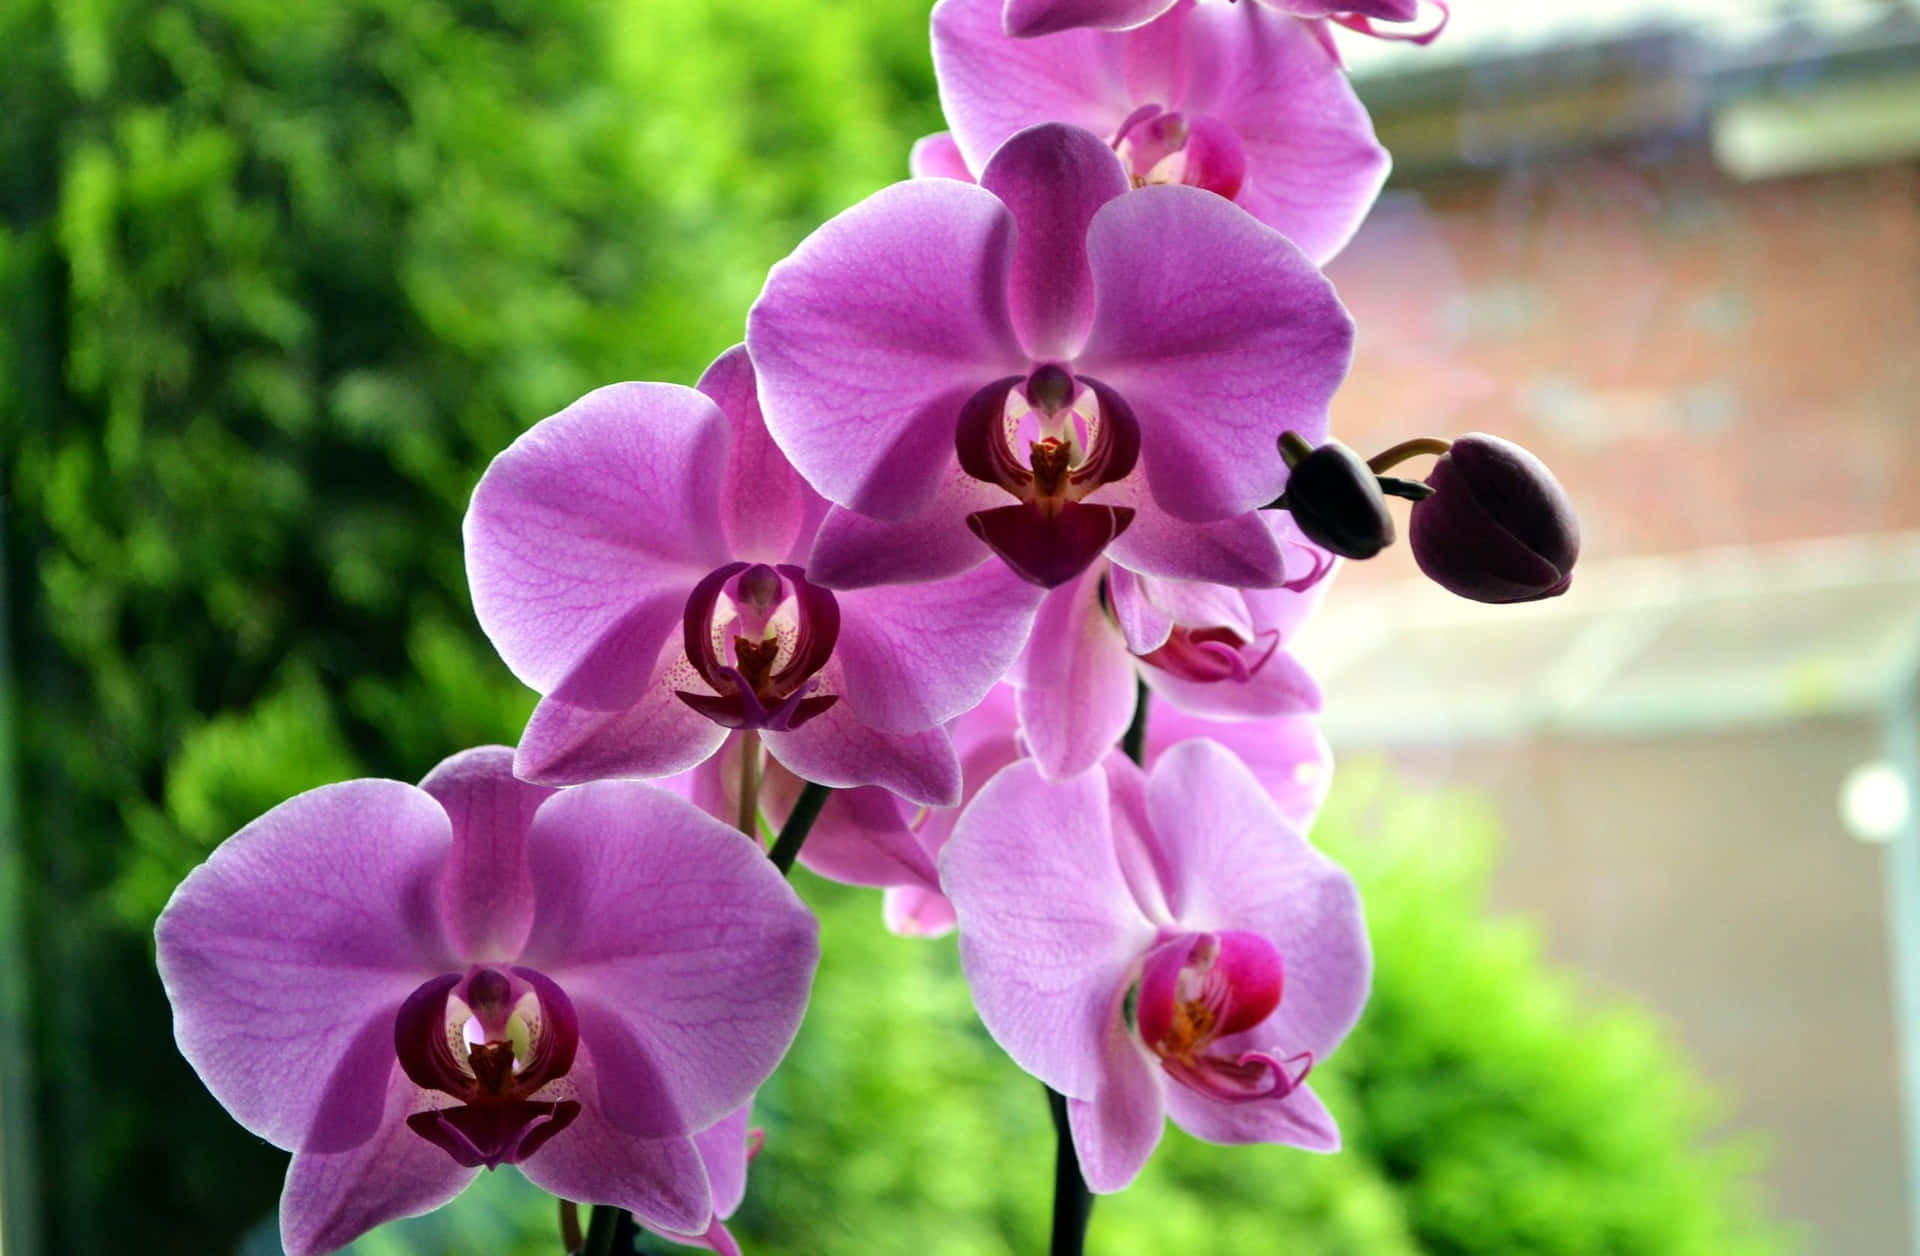 A Beautiful and Colorful Orchid Flower